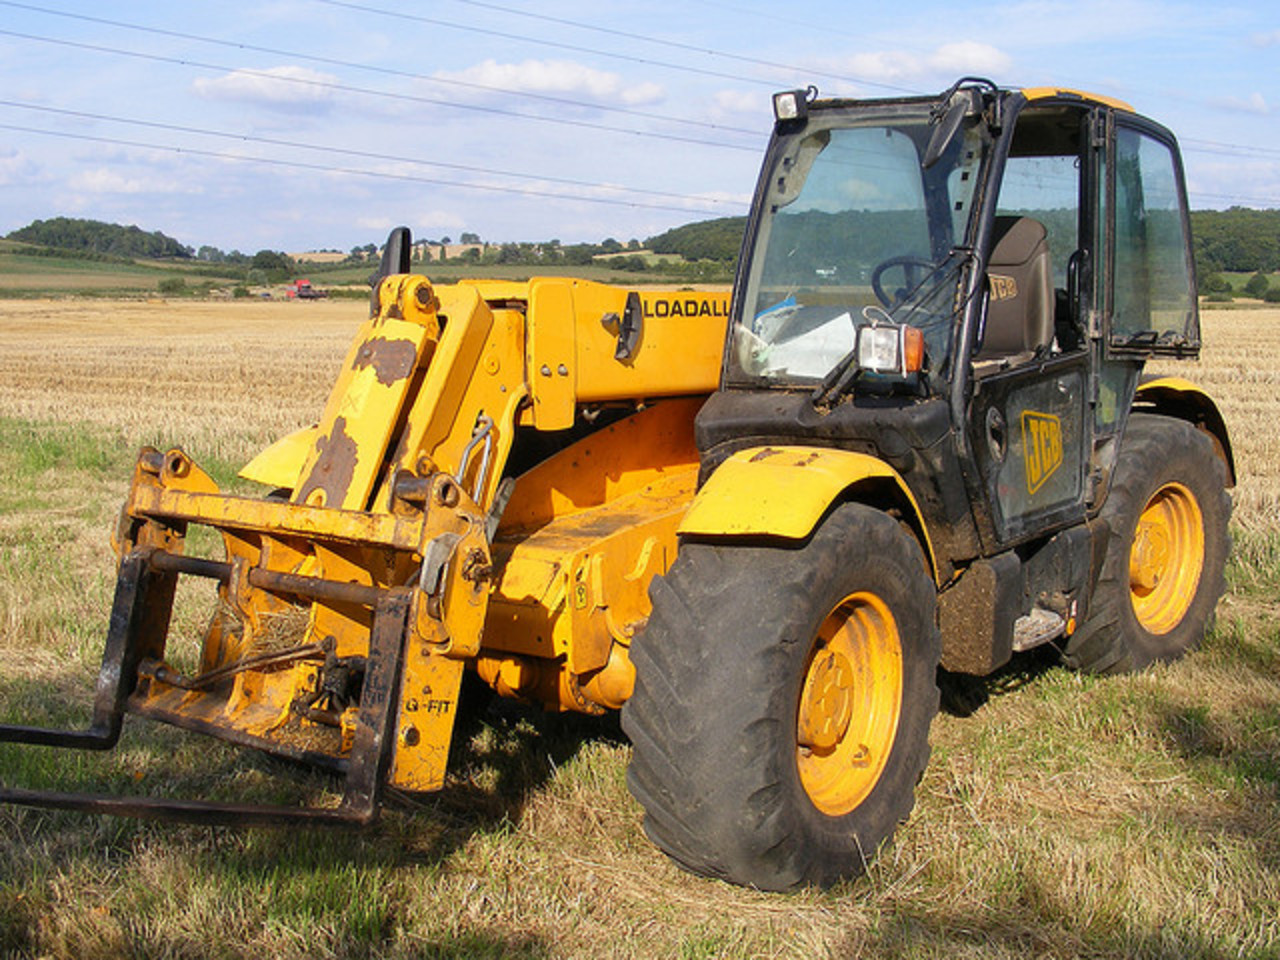 JCB Loadall Photo Gallery: Photo #07 out of 9, Image Size - 500 x ...